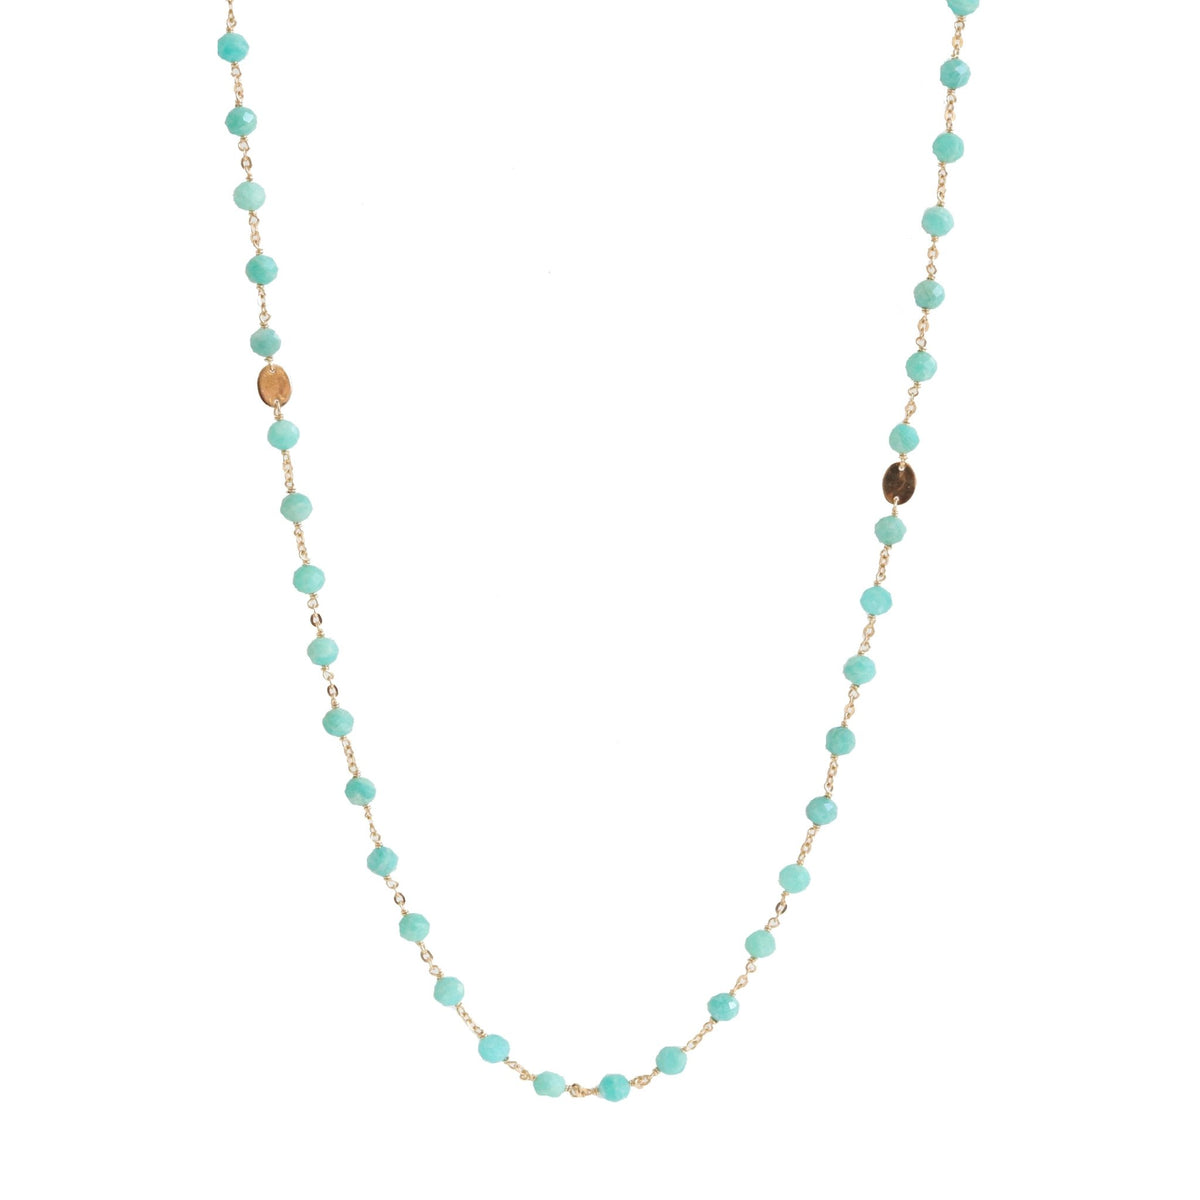 ICONIC LONG BEADED NECKLACE - AQUA AMAZONITE &amp; GOLD 34&quot; - SO PRETTY CARA COTTER